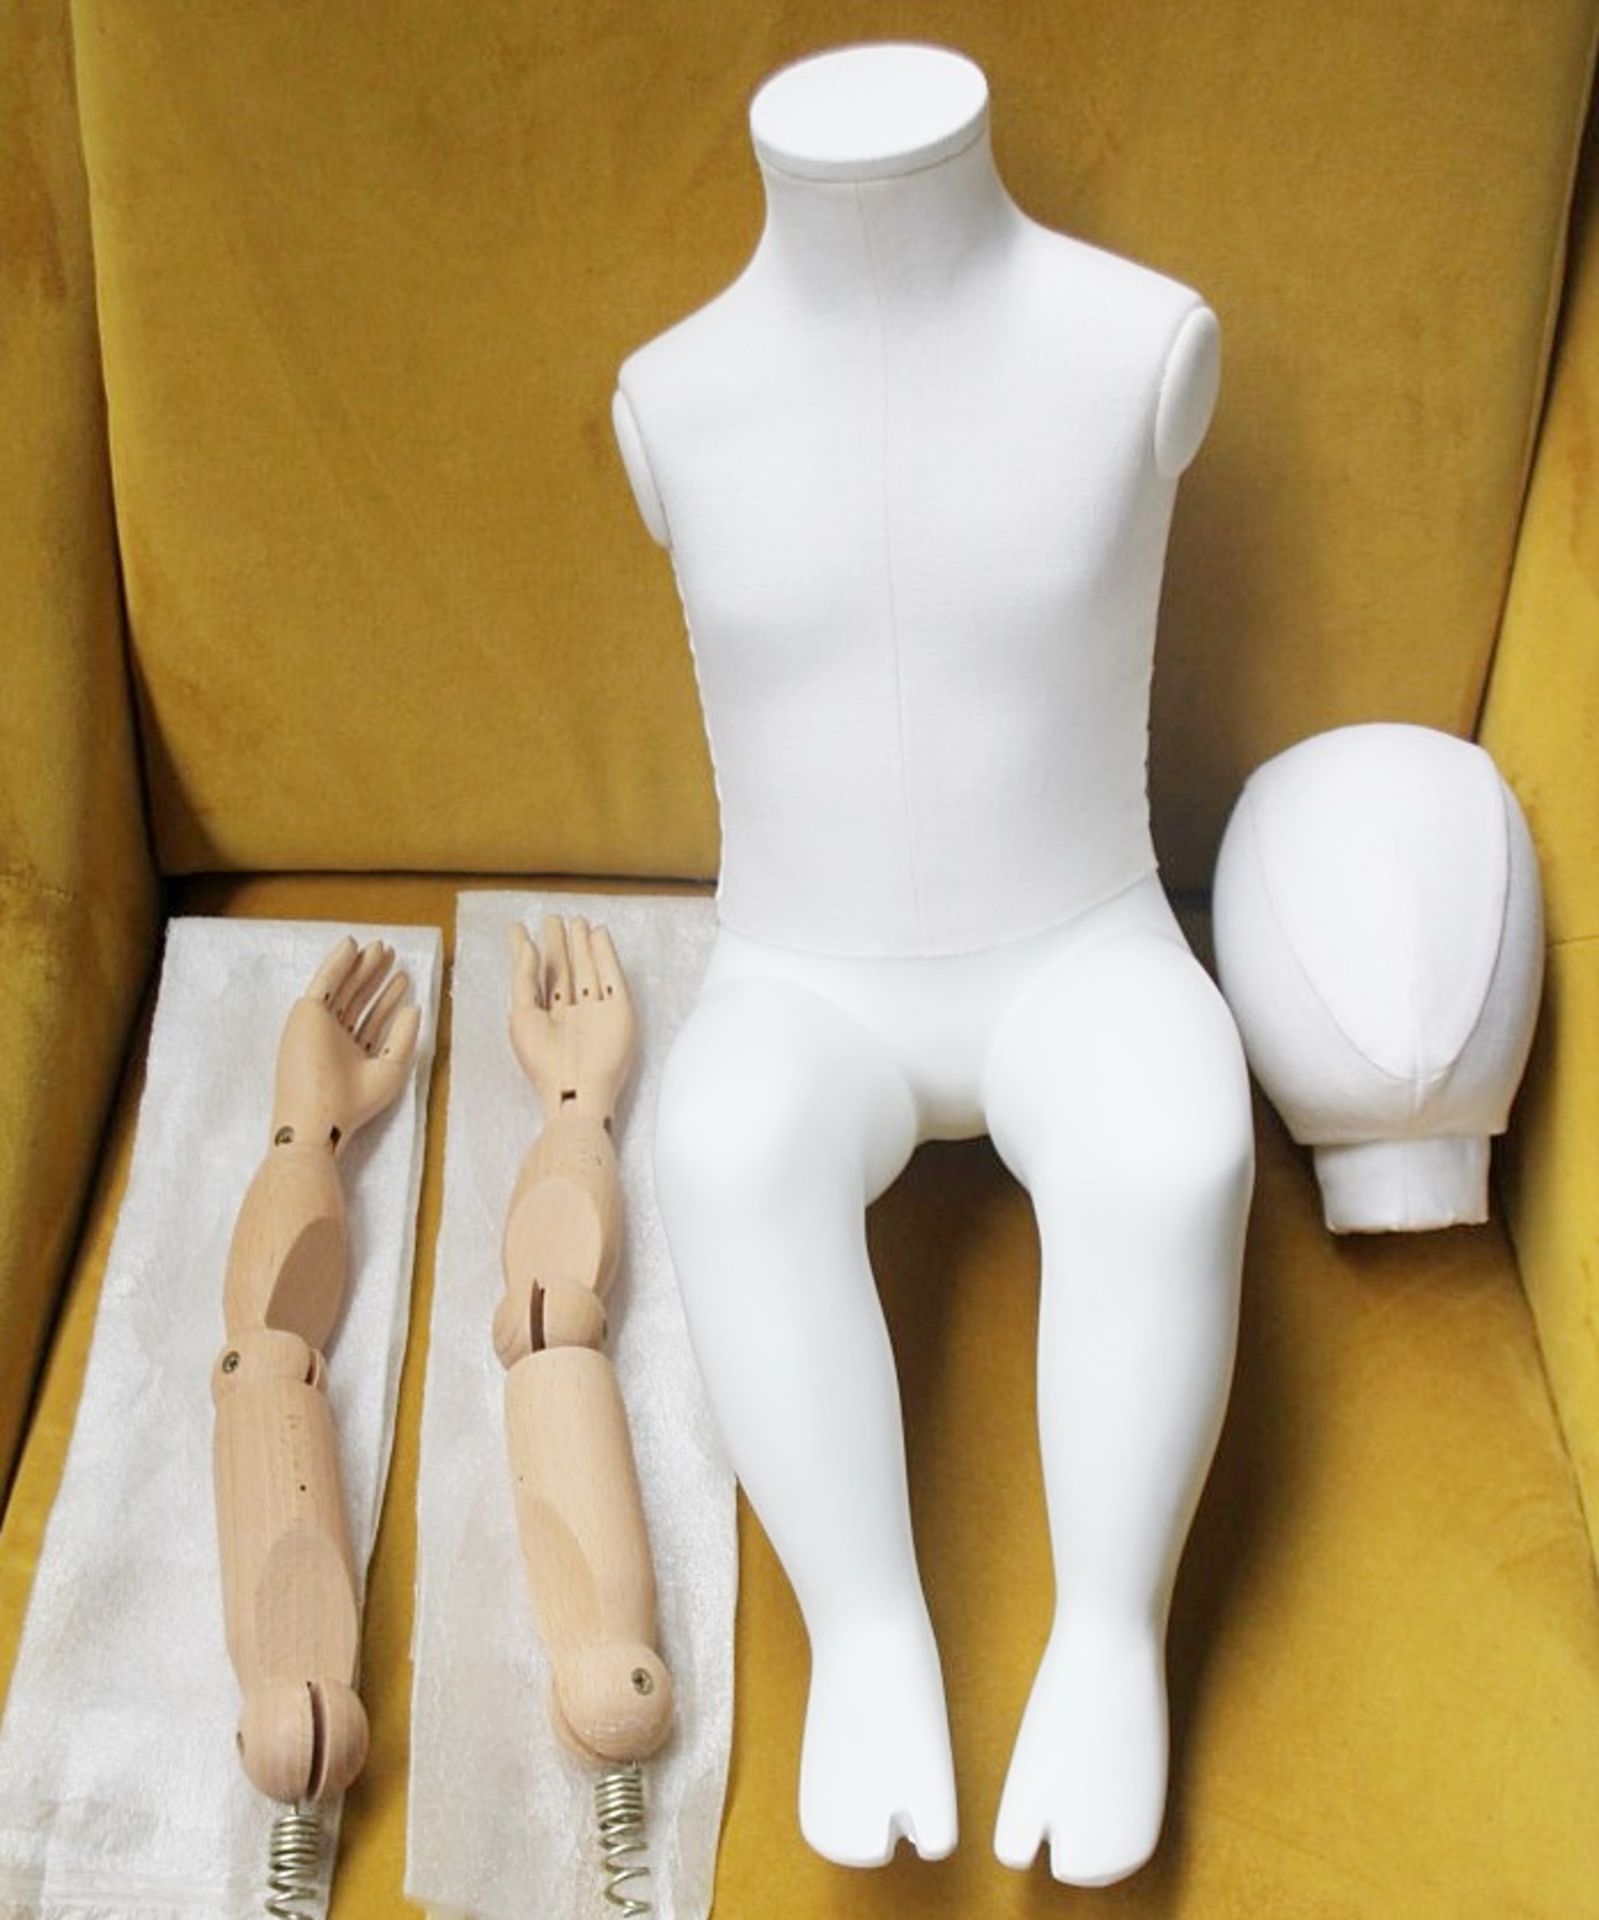 5 x Assorted ATREZZO Commercial High-grade BABY Shop Mannequin Dummies With Posable Wooden Arms - - Image 5 of 10